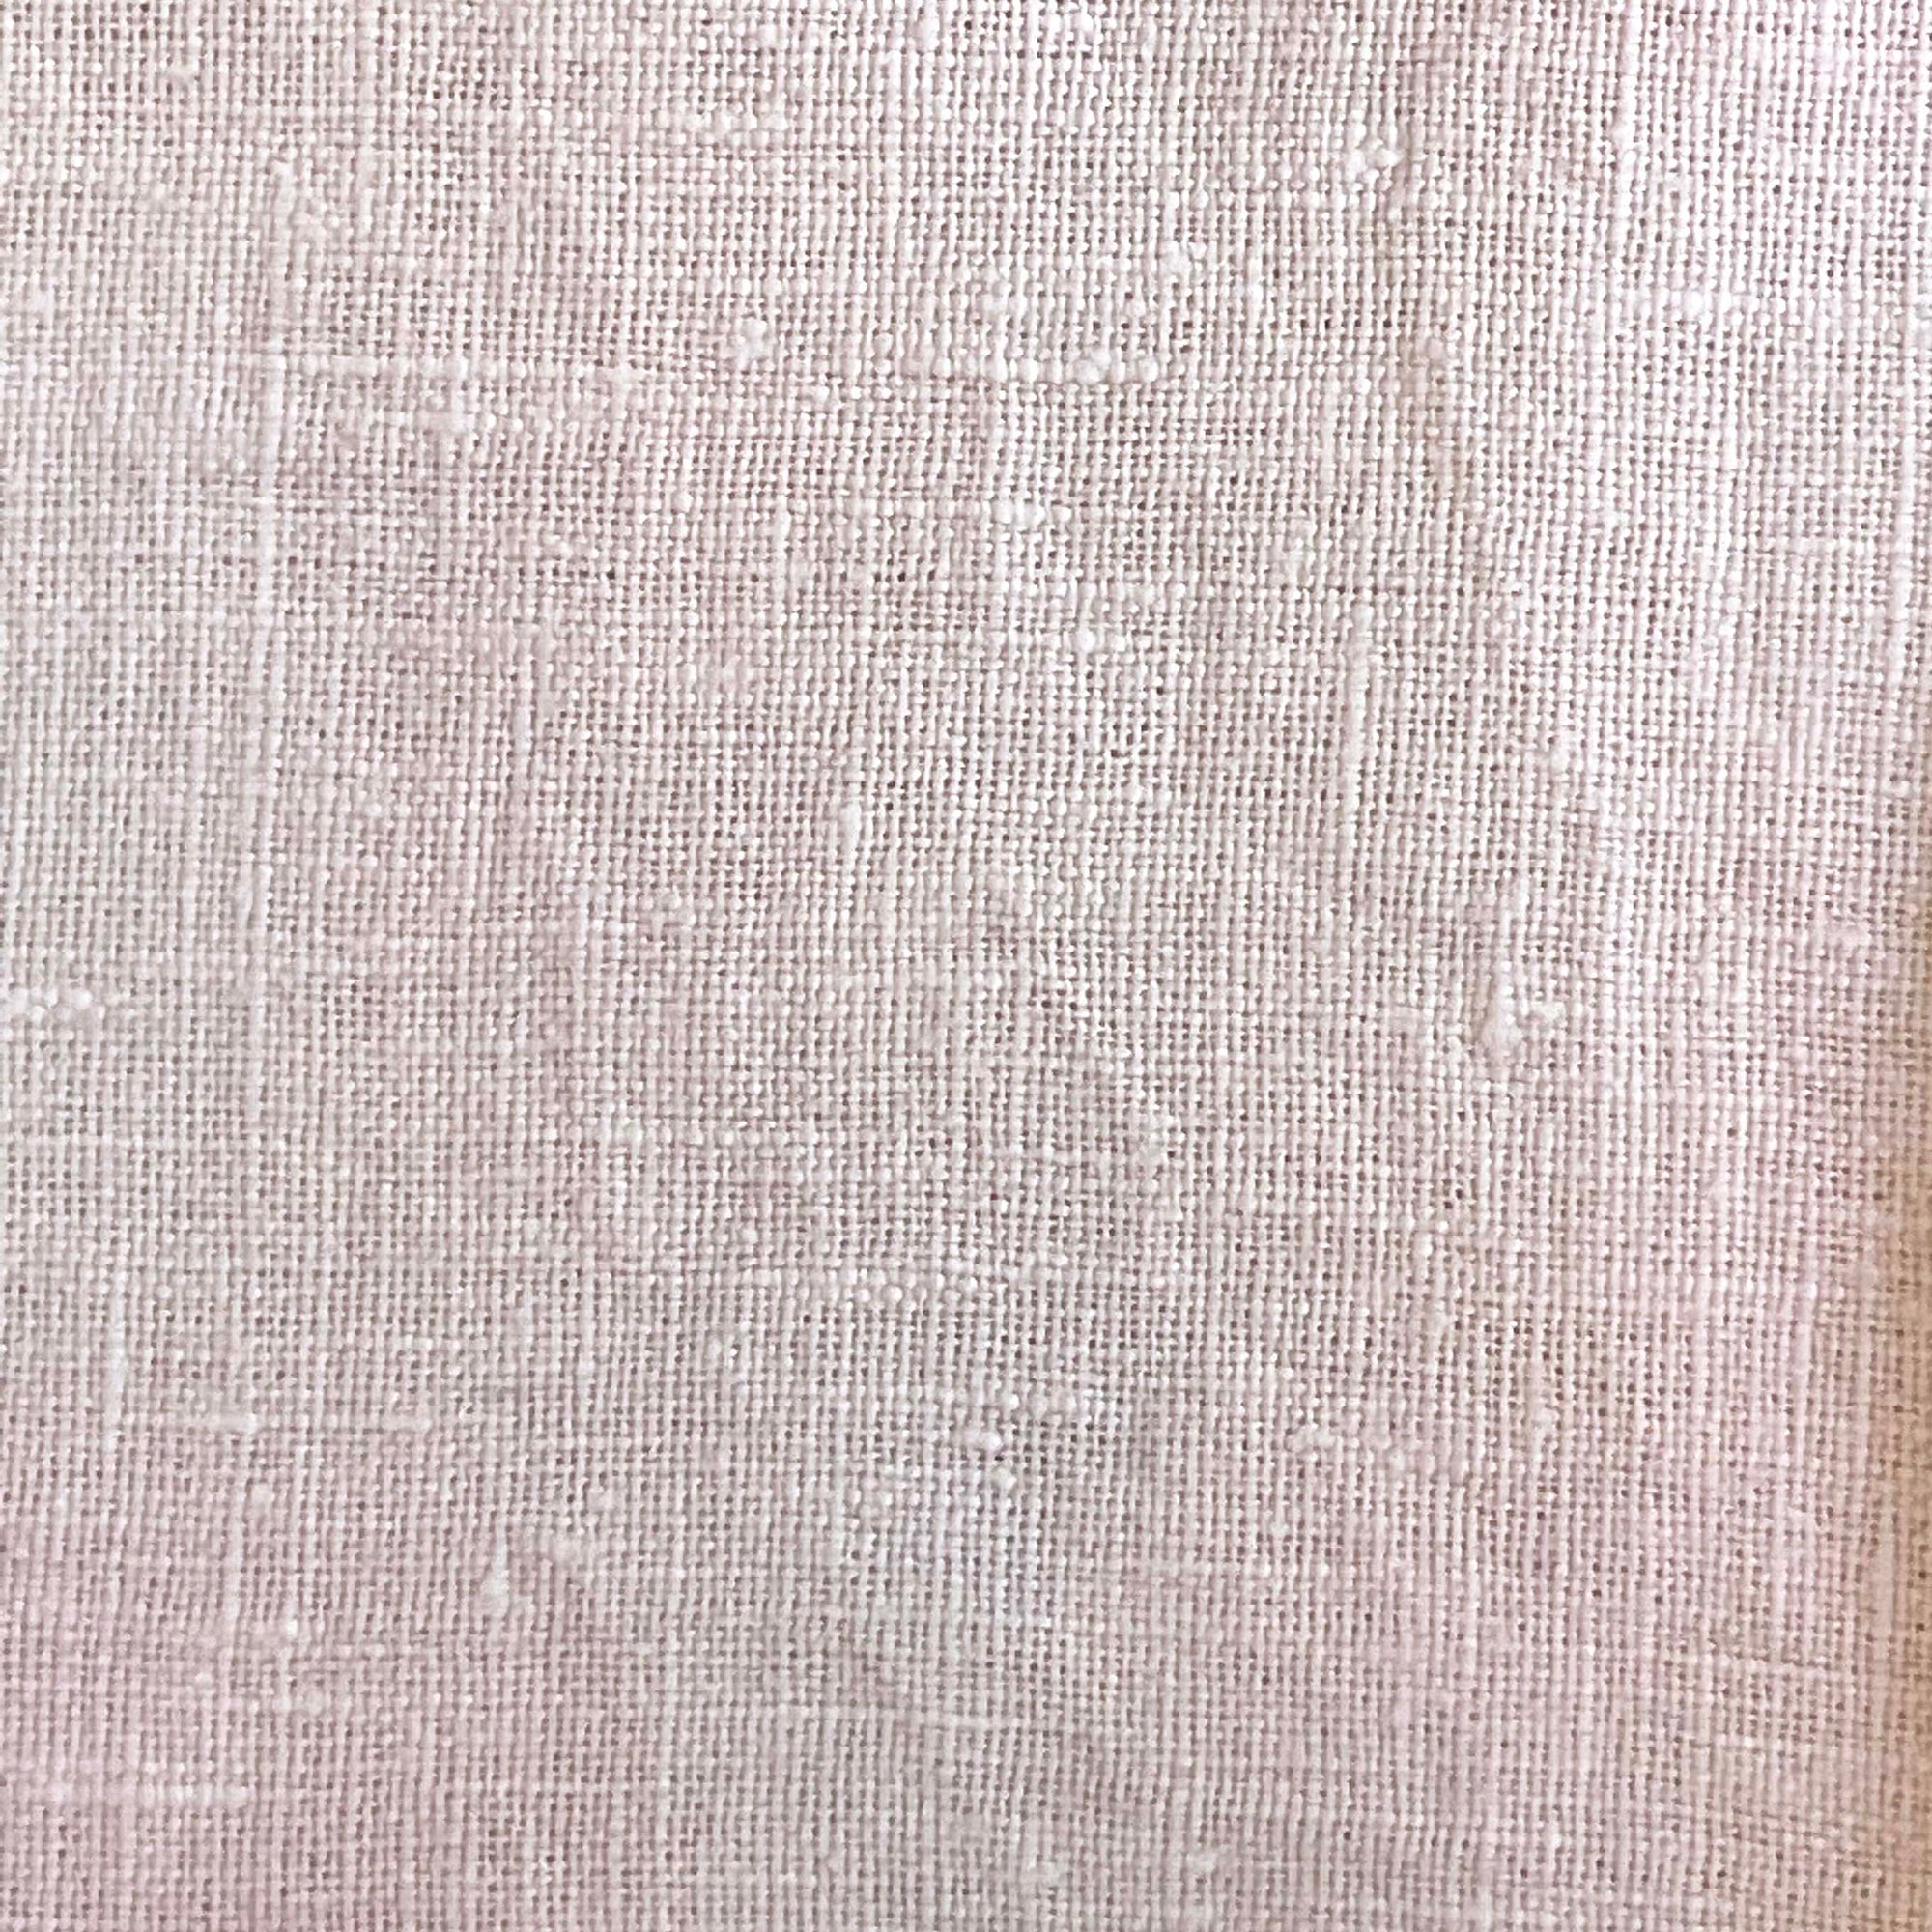 www.colourstreams.com.au Colour Streams DL 33 Antique Pearl Linen Count 36 Hand Dyed Pinks Neutrals Greys Creams Embroidery Cross Stitch Textile Arts FIbre Embroidery Slow Stitching Counted Meditative Australia